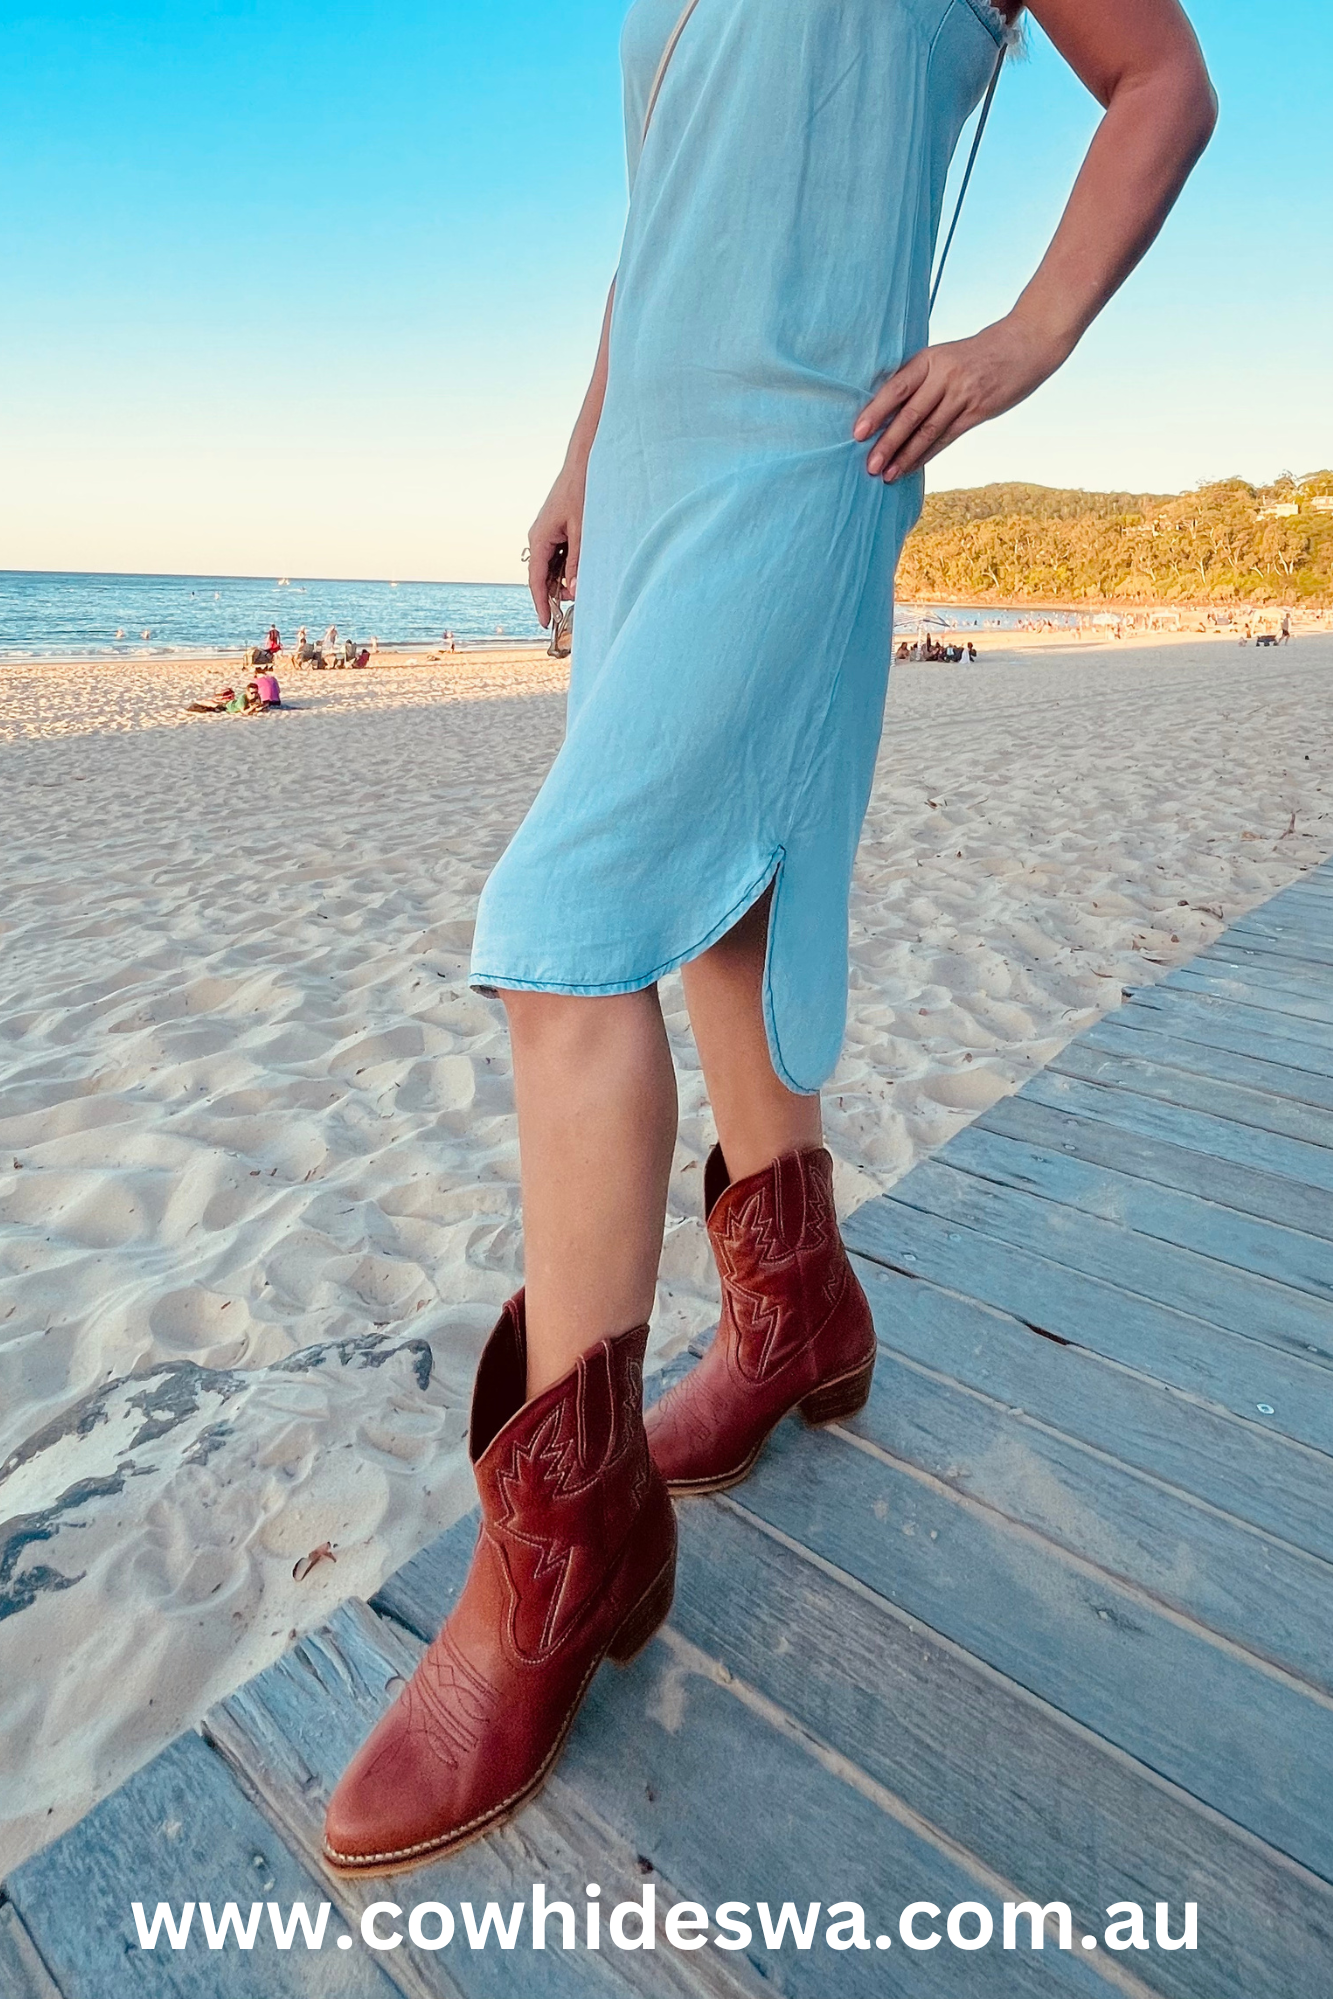 'Denver' Cowgirl Leather Boots